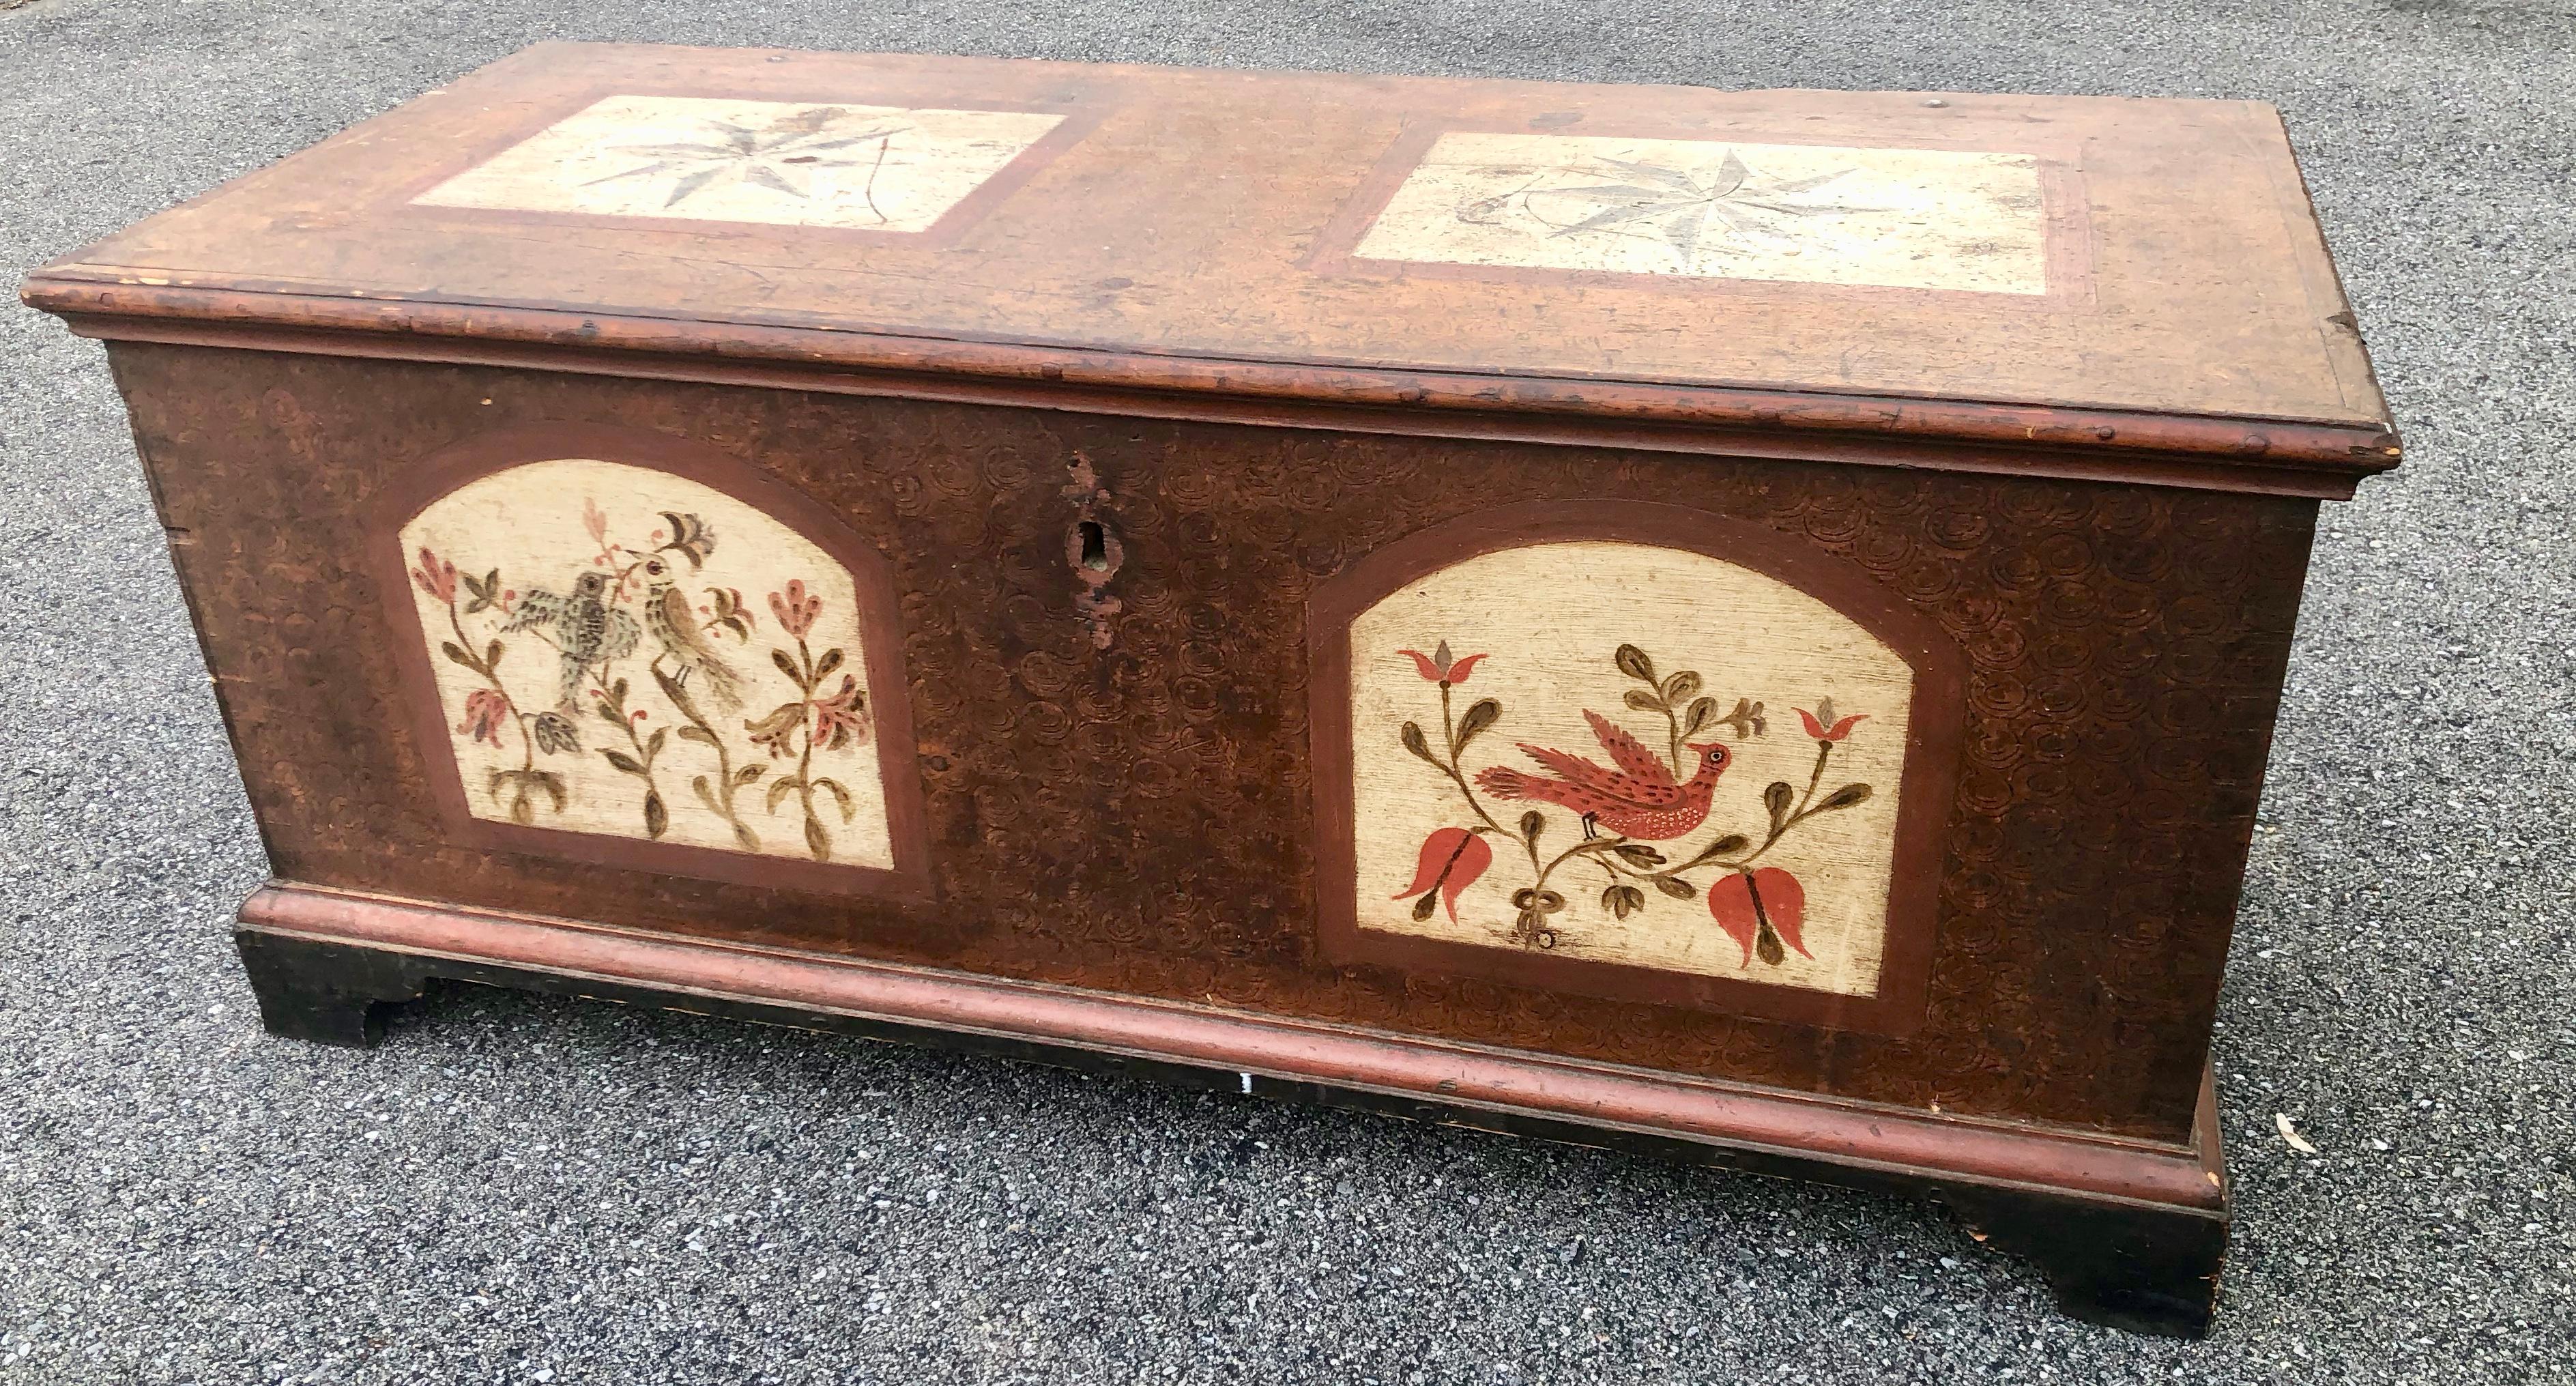 Folk Art paint decorated blanket chest by Fraktur artist Heinriech Otto 1790 Dauphin County Pennsylvania original paint.
The painted decoration on this Pennsylvania-German chest relates to the work of the fraktur artists Heinrich and Daniel Otto